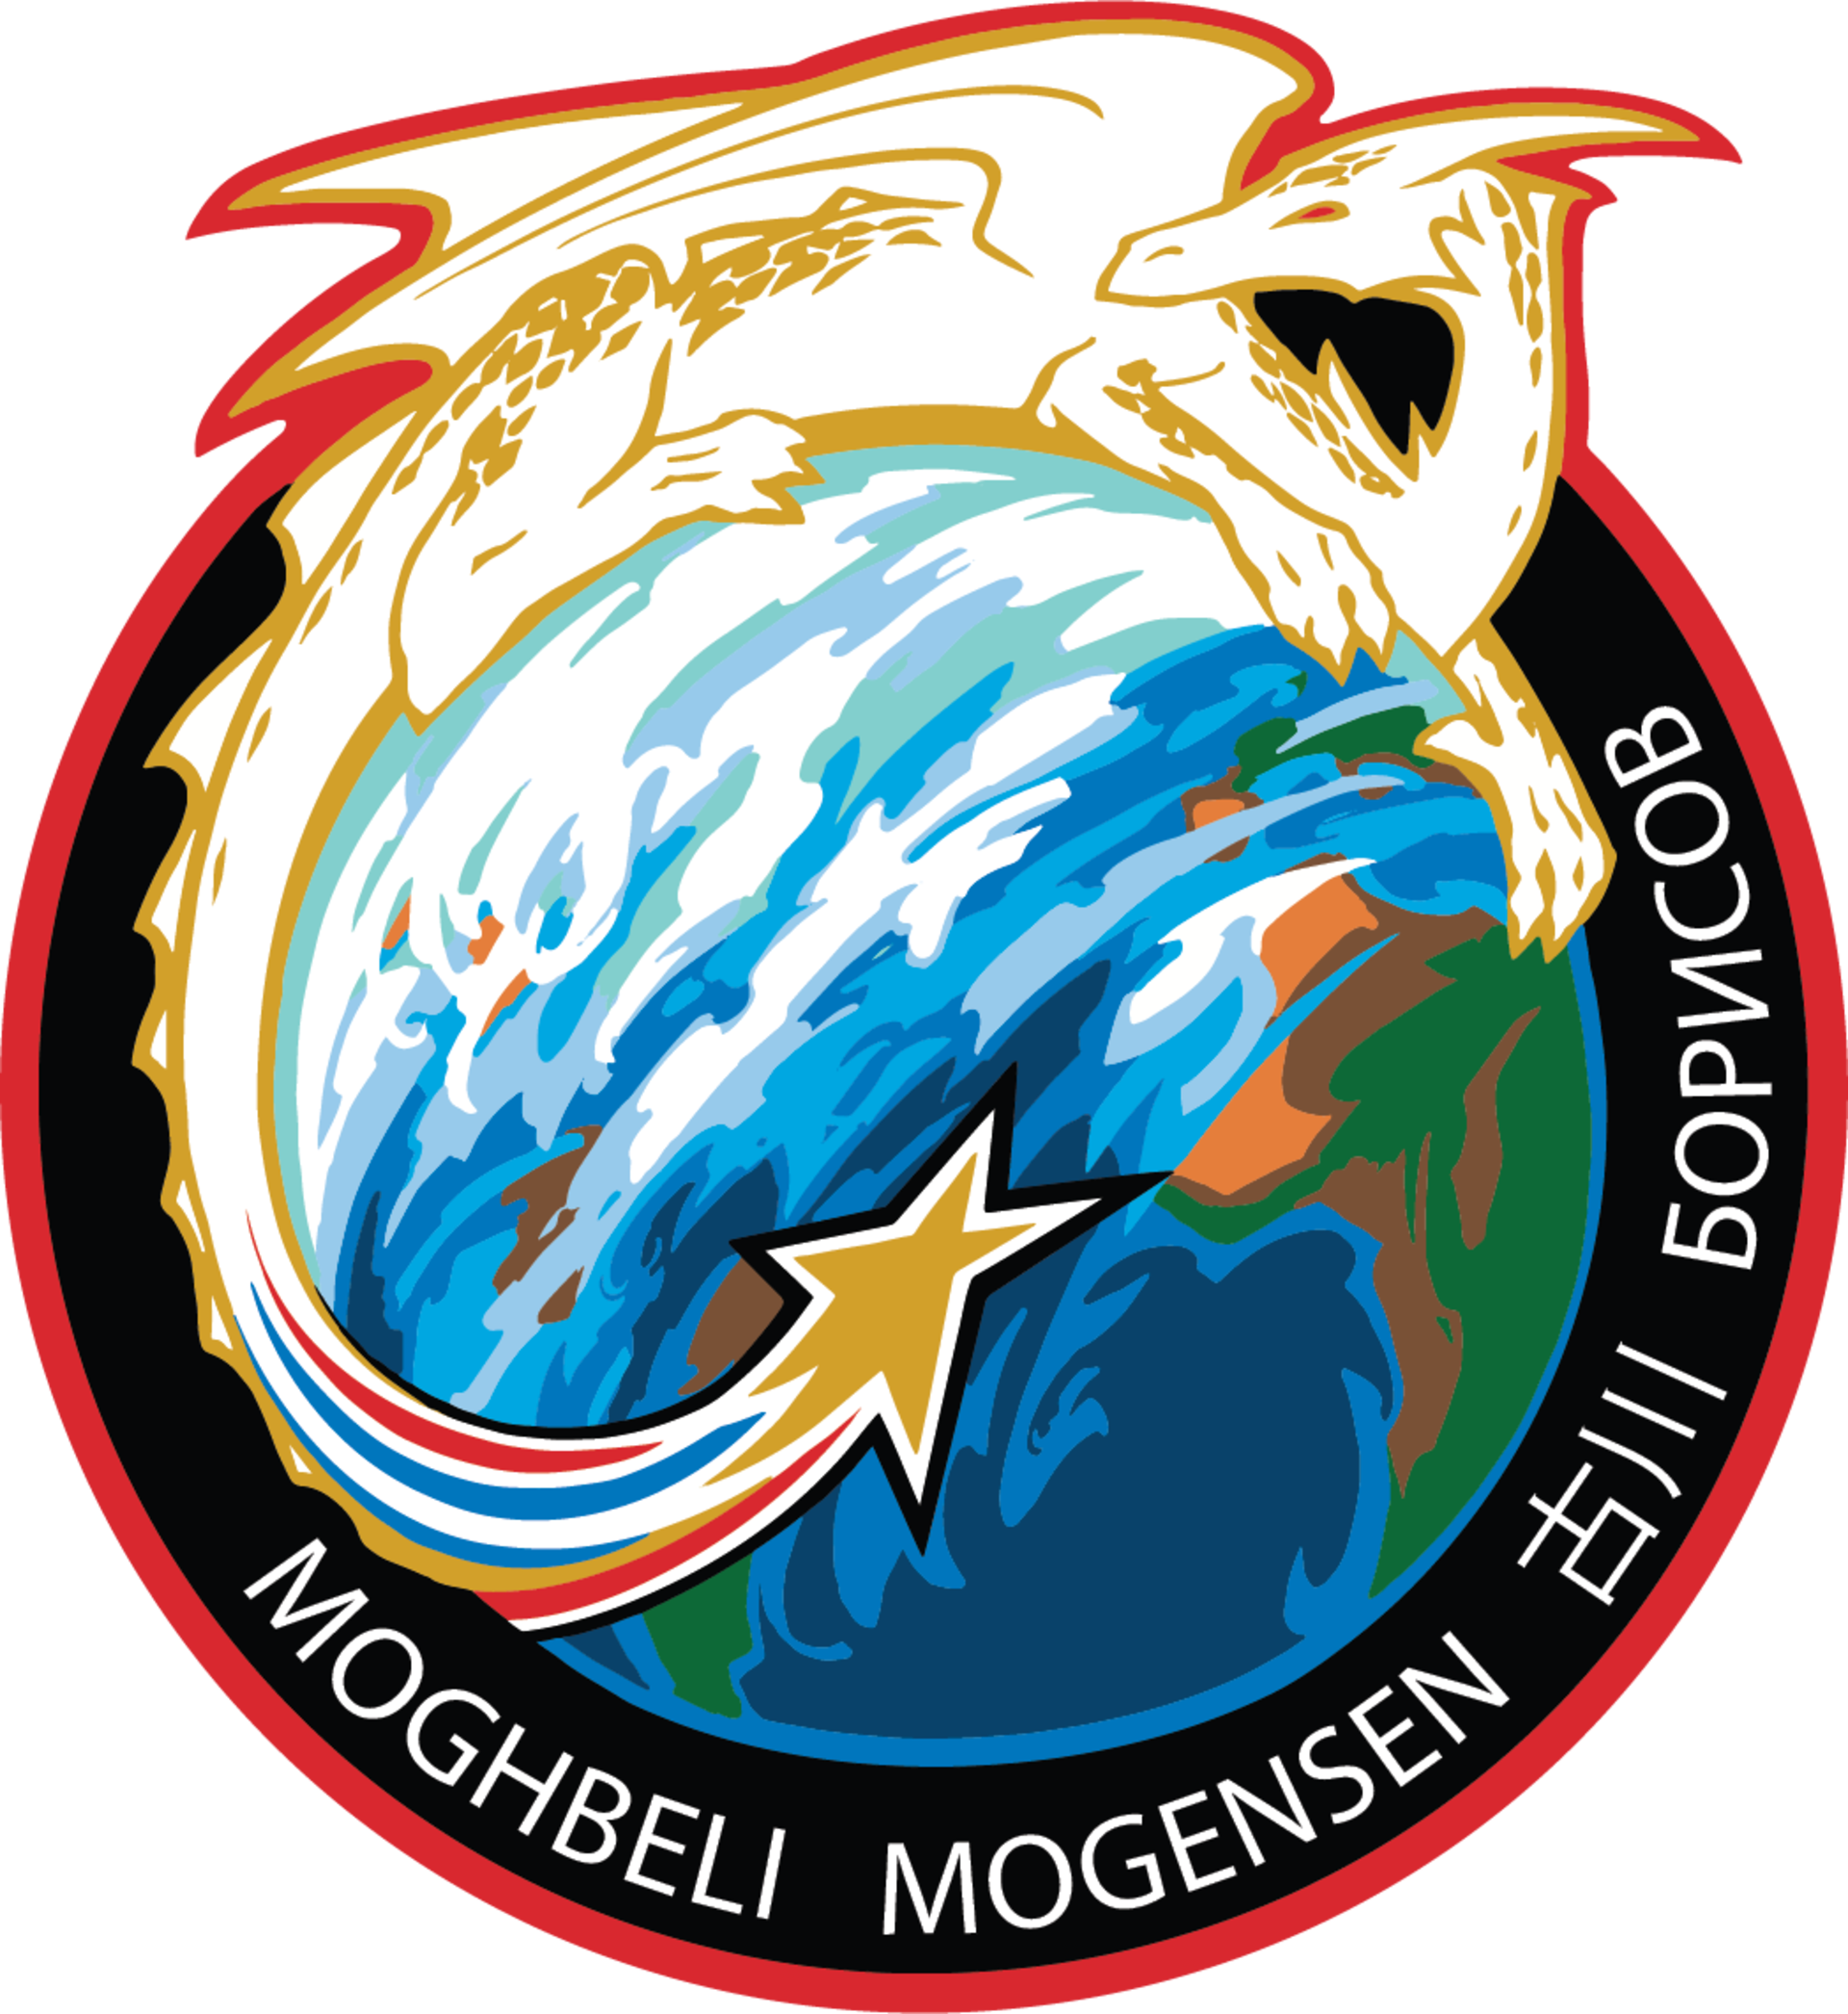 The mission patch for Crew-7